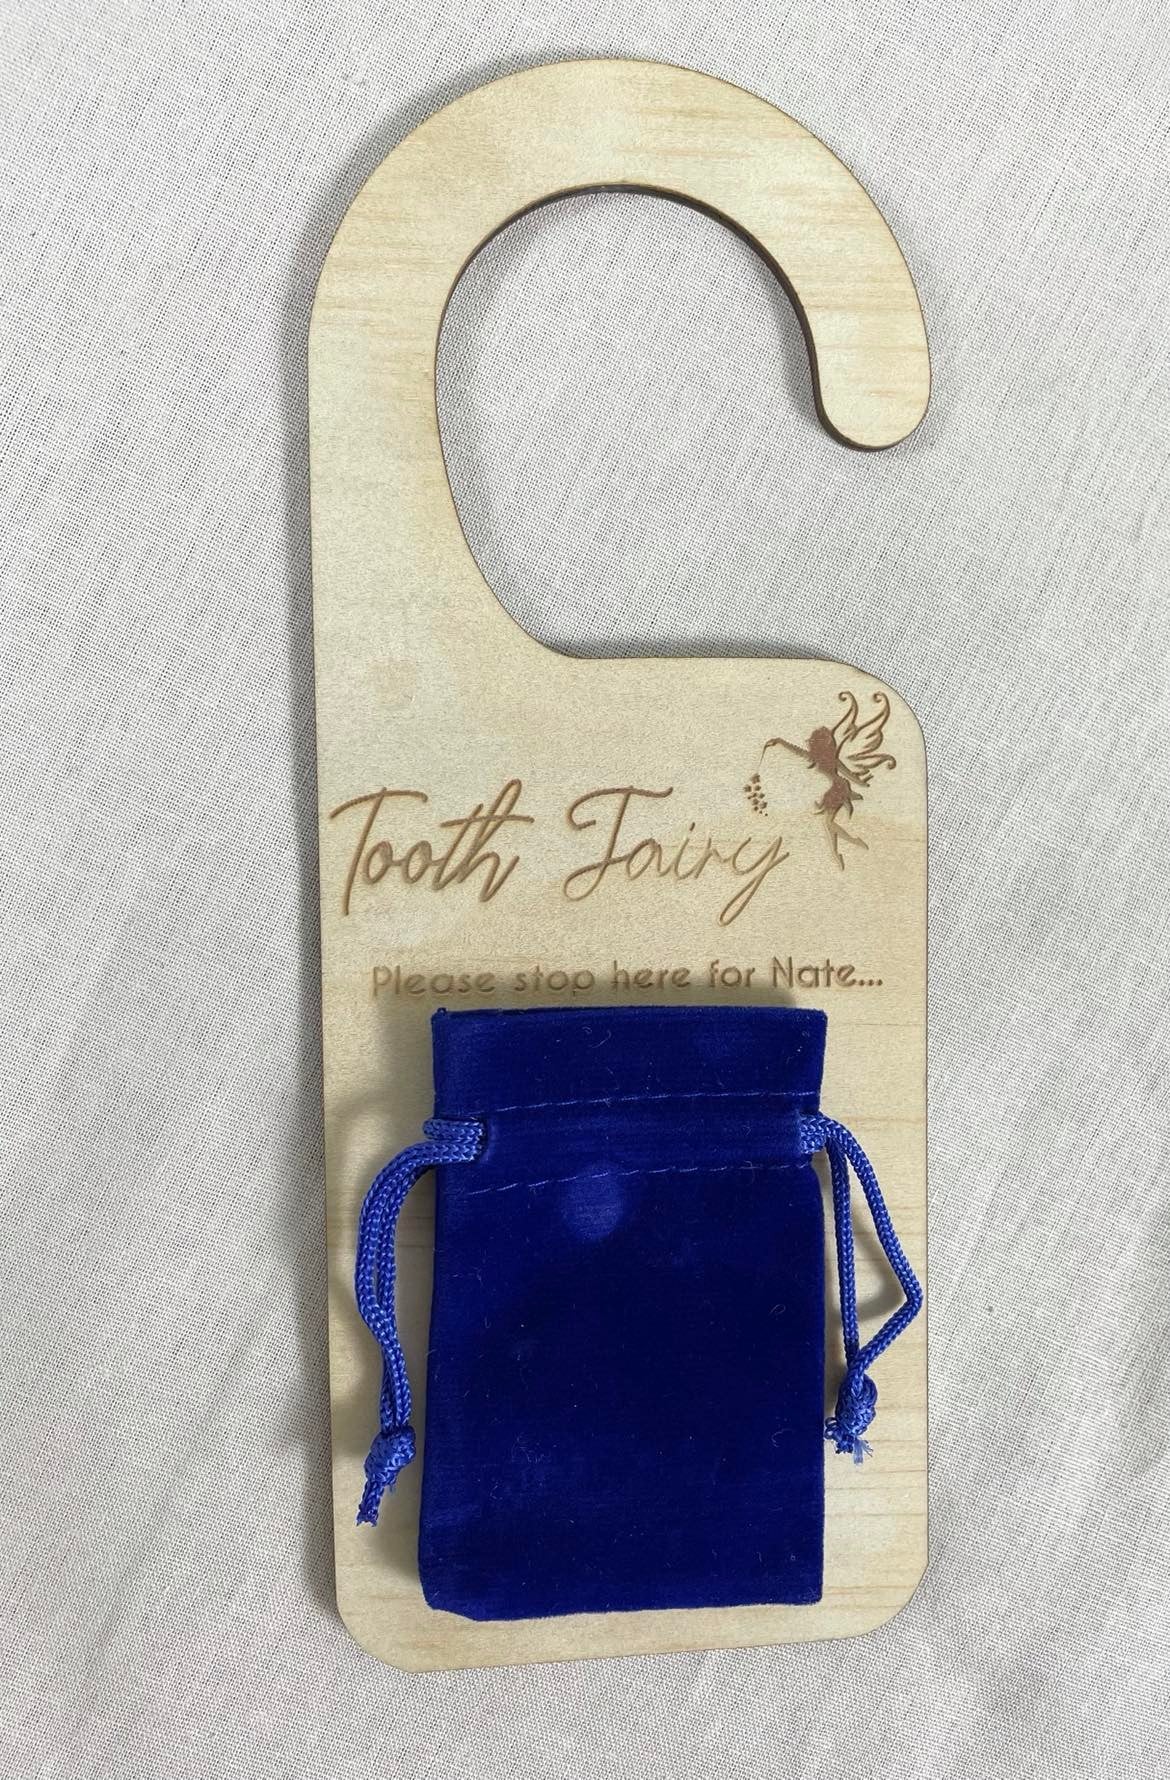 Tooth Fairy hangers (Nate) SALE